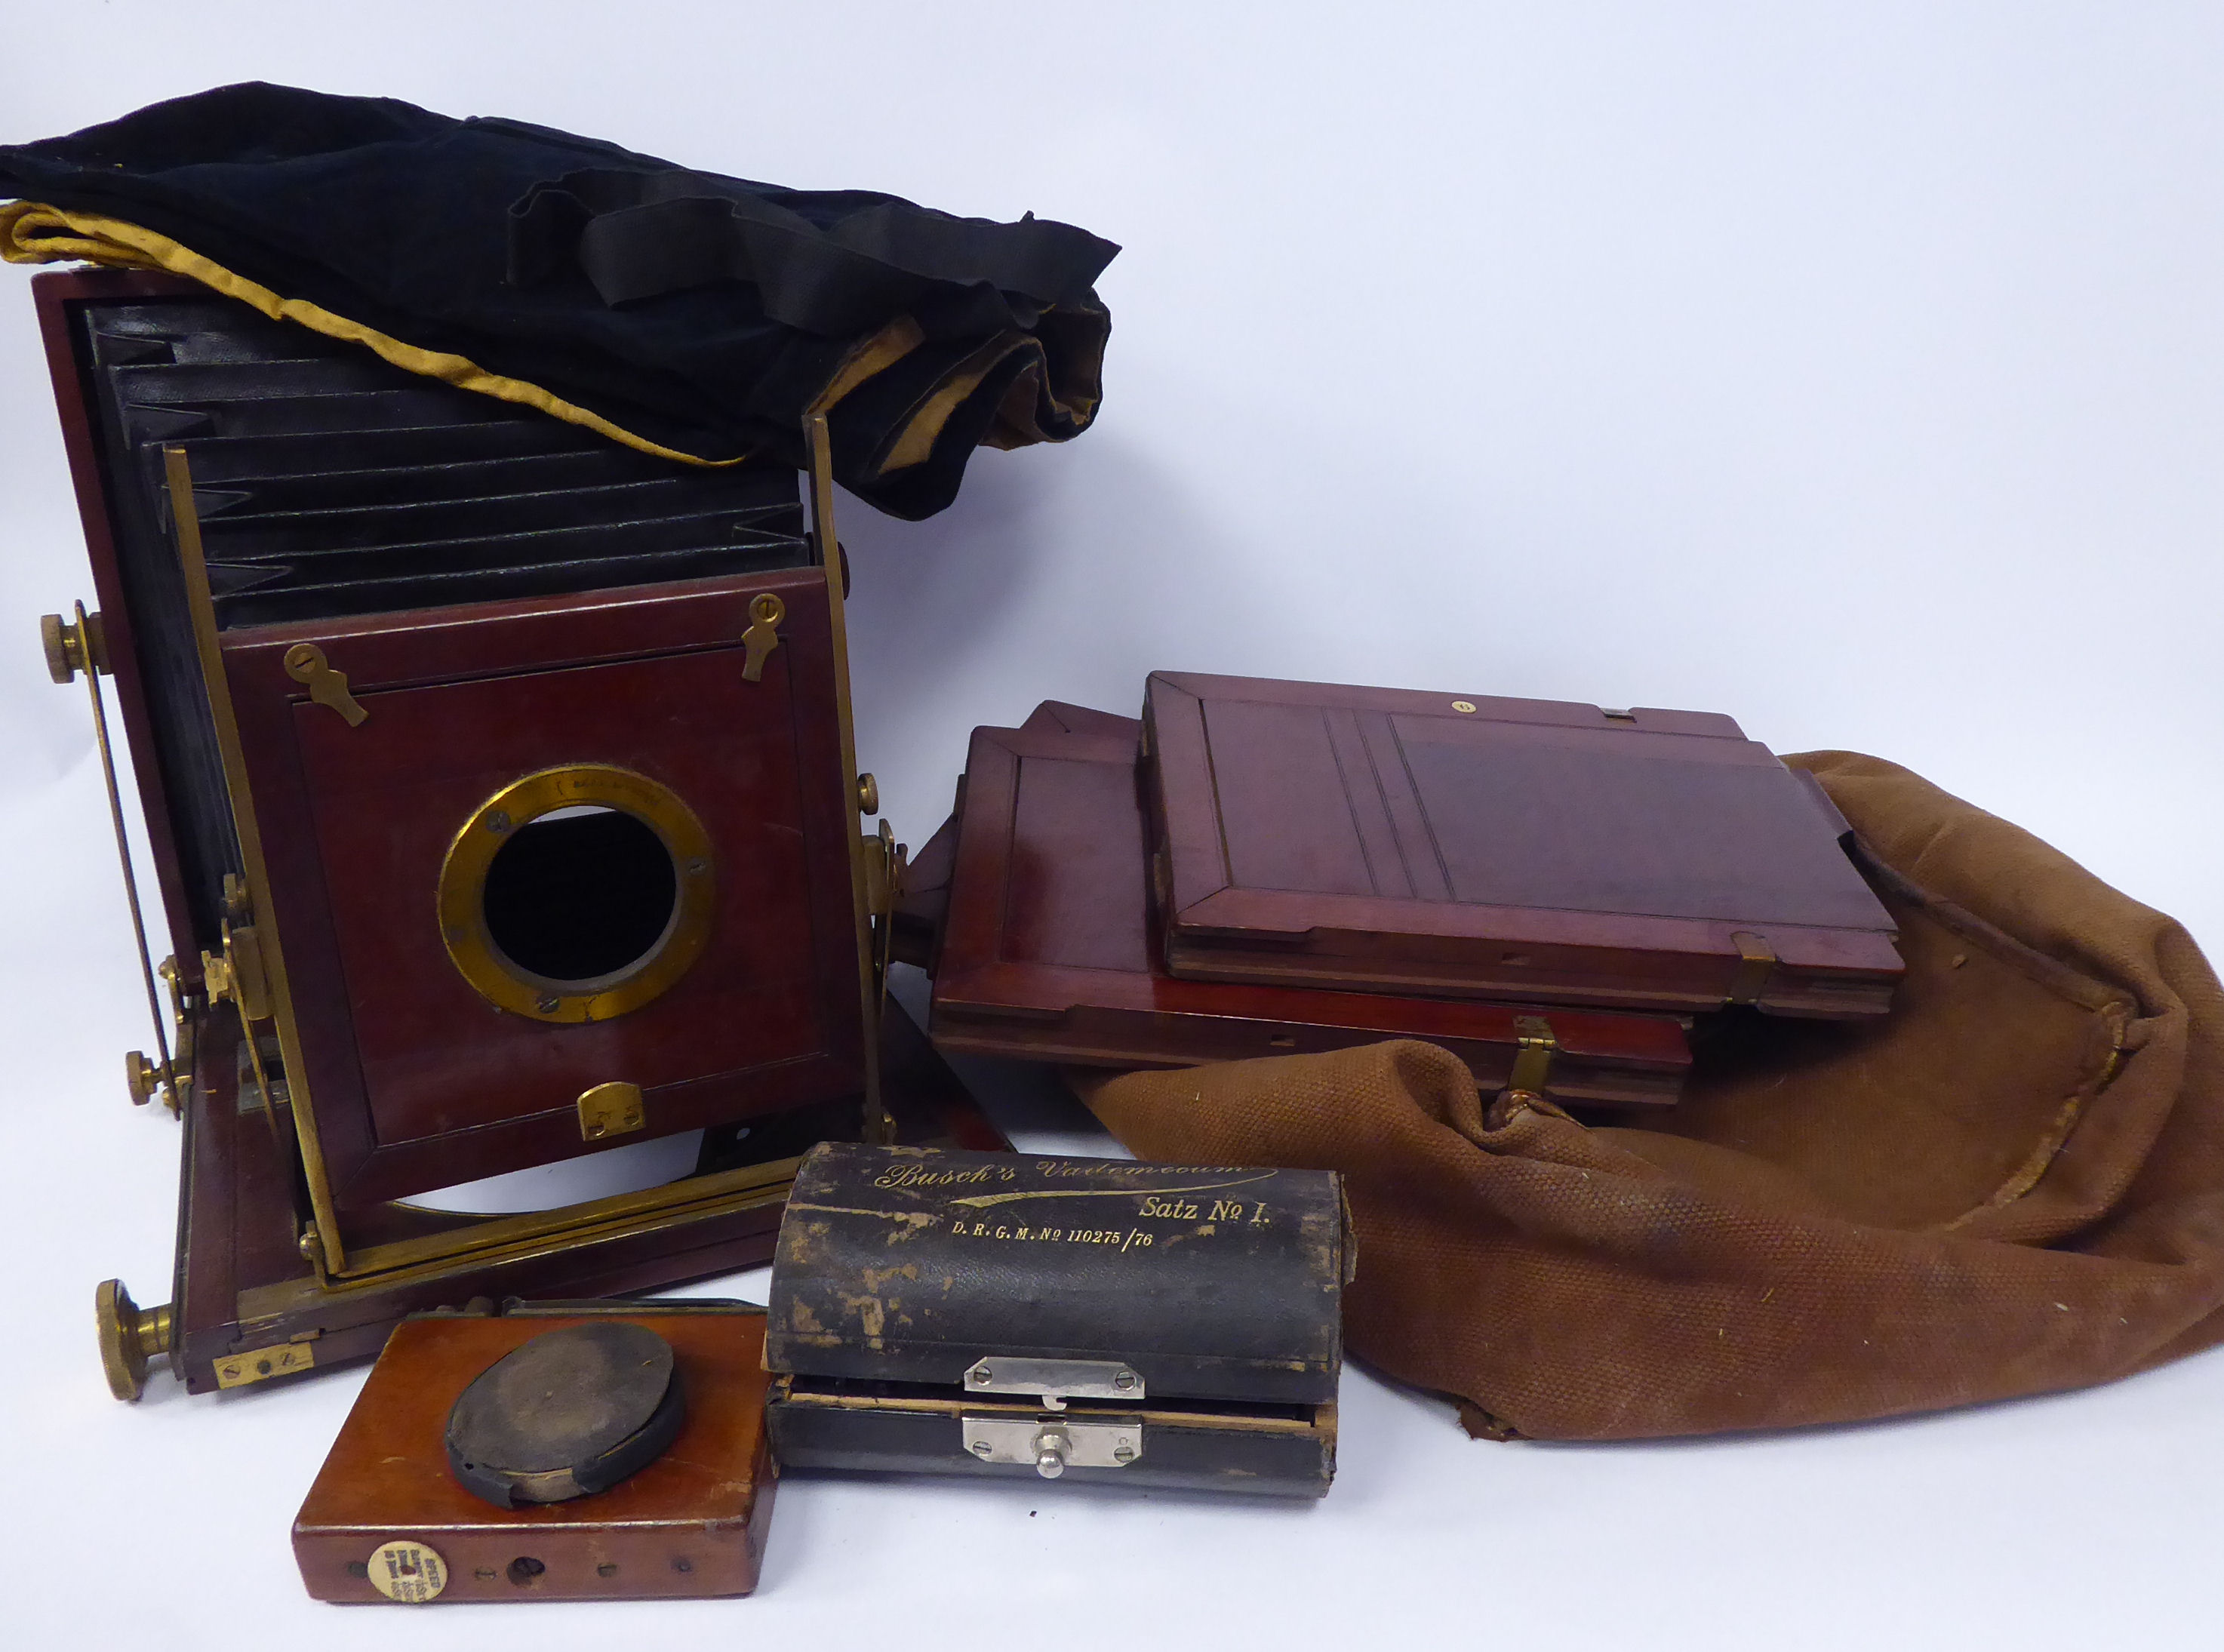 A late 19thC lacquered brass moulded mahogany plate camera with a cased Busch's Vadermecium Satz.No.